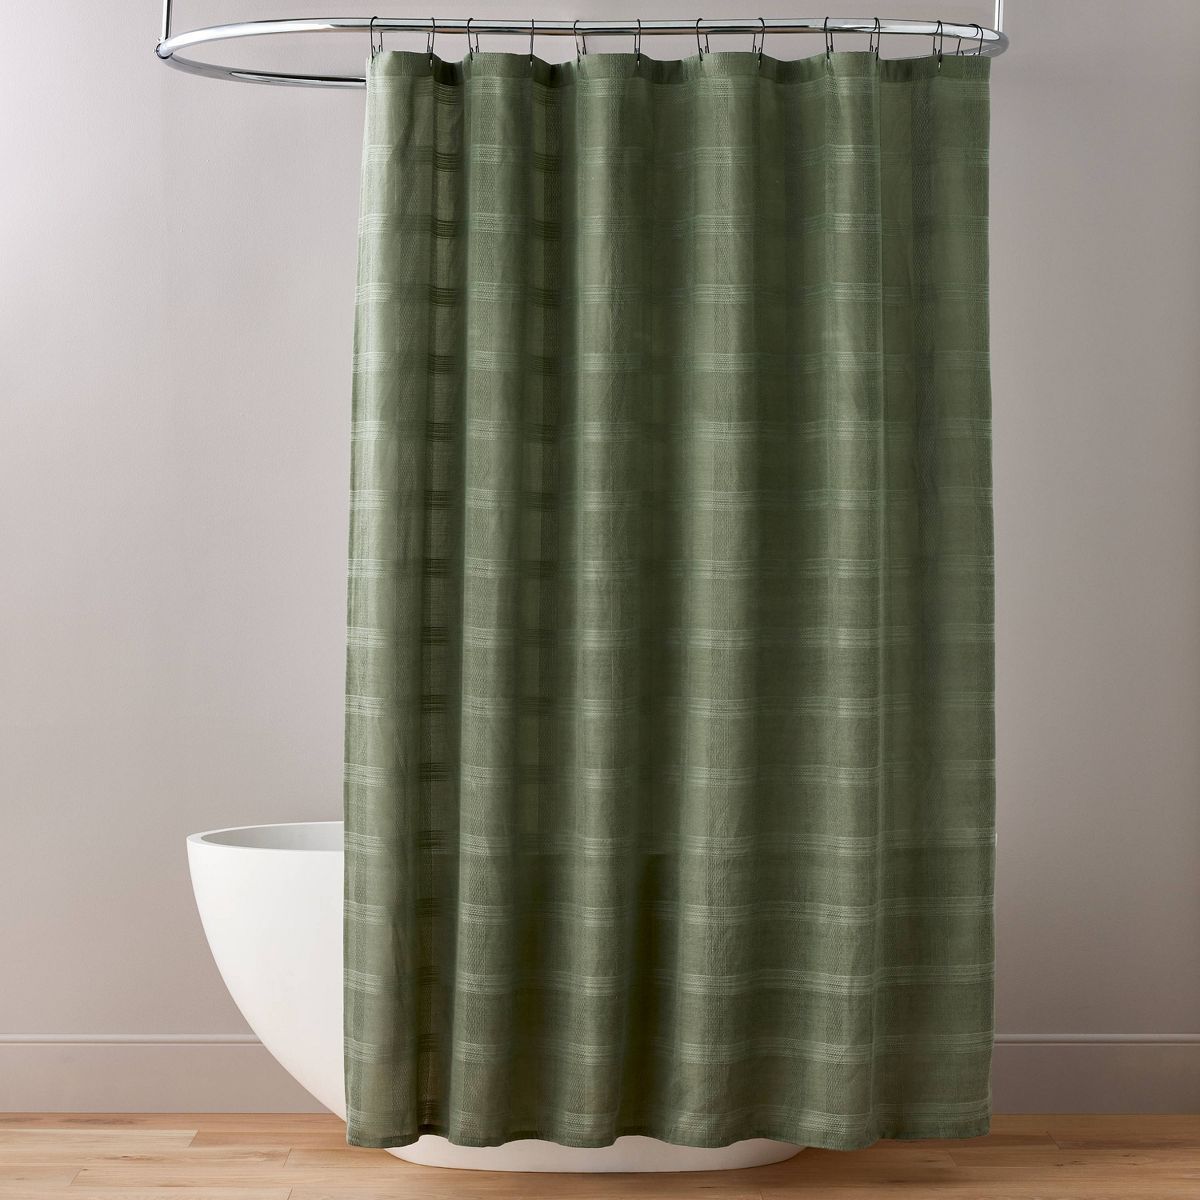 Washed Square Shower Curtain - Hearth & Hand™ with Magnolia | Target